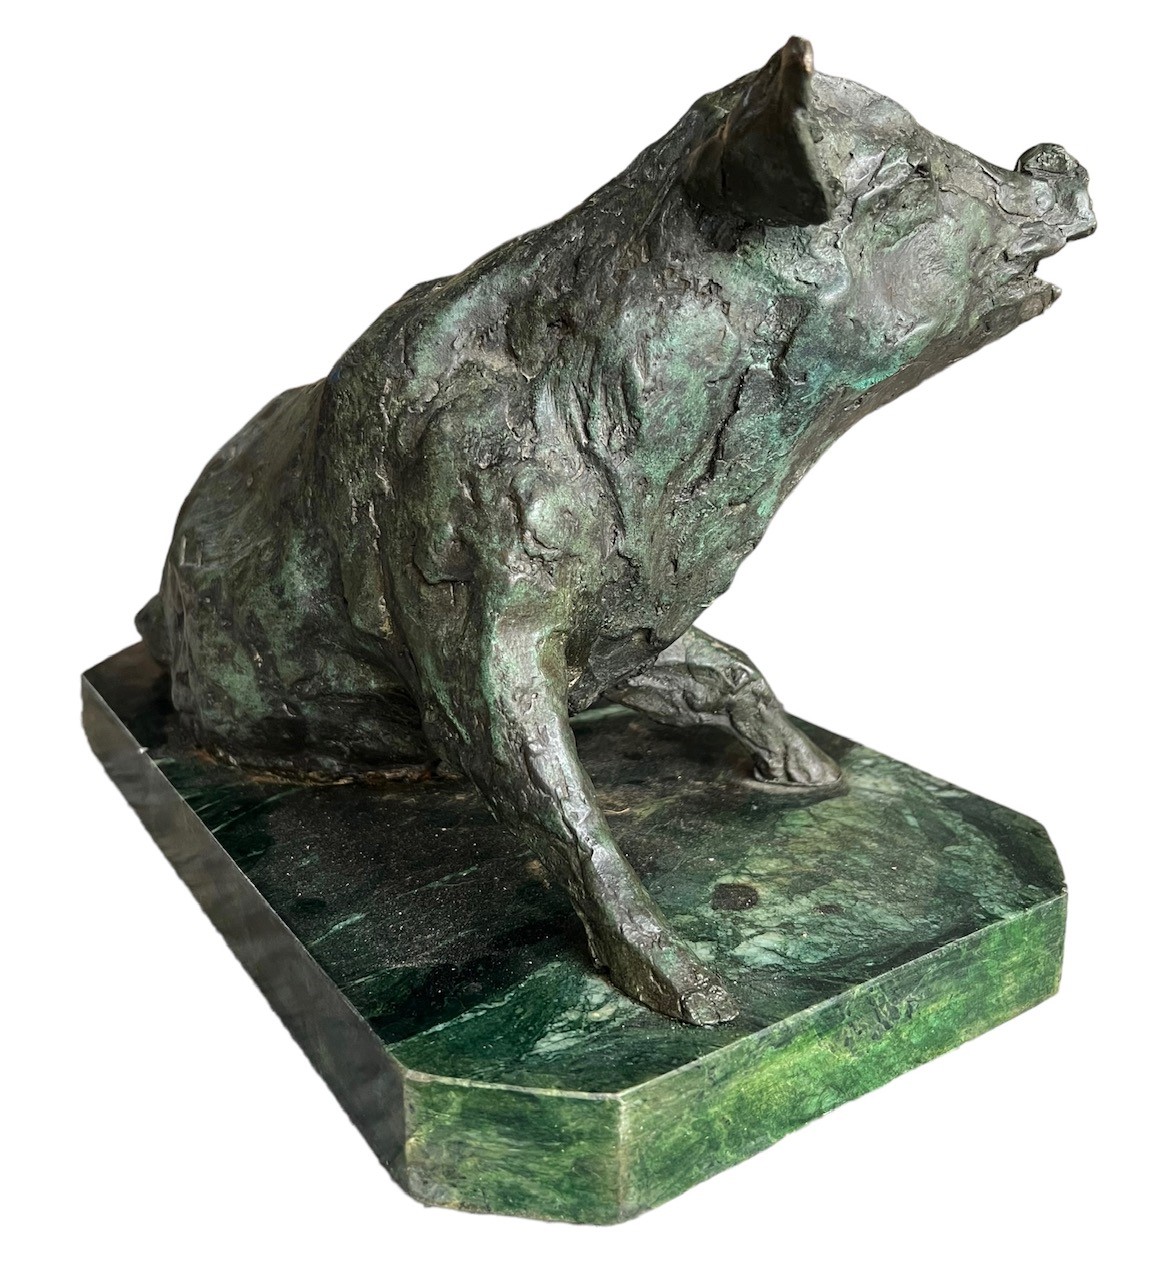 A DECORATIVE 20TH CENTURY BRONZE SCULPTURE OF A SEATED PIG Raised on a marble plinth base, - Image 7 of 8